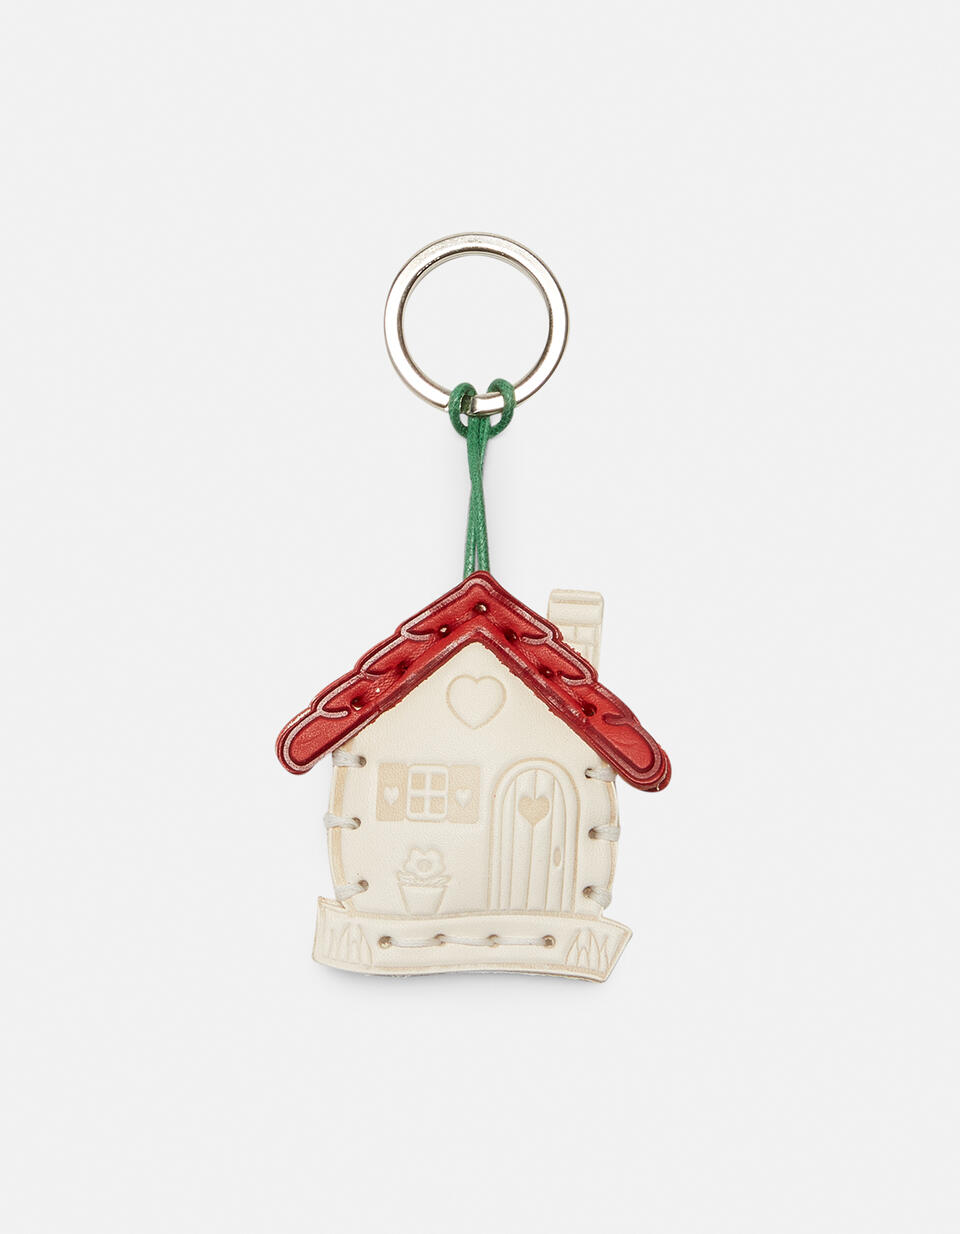 Home Leather key ring  - Key Holders - Women's Accessories - Accessories - Cuoieria Fiorentina